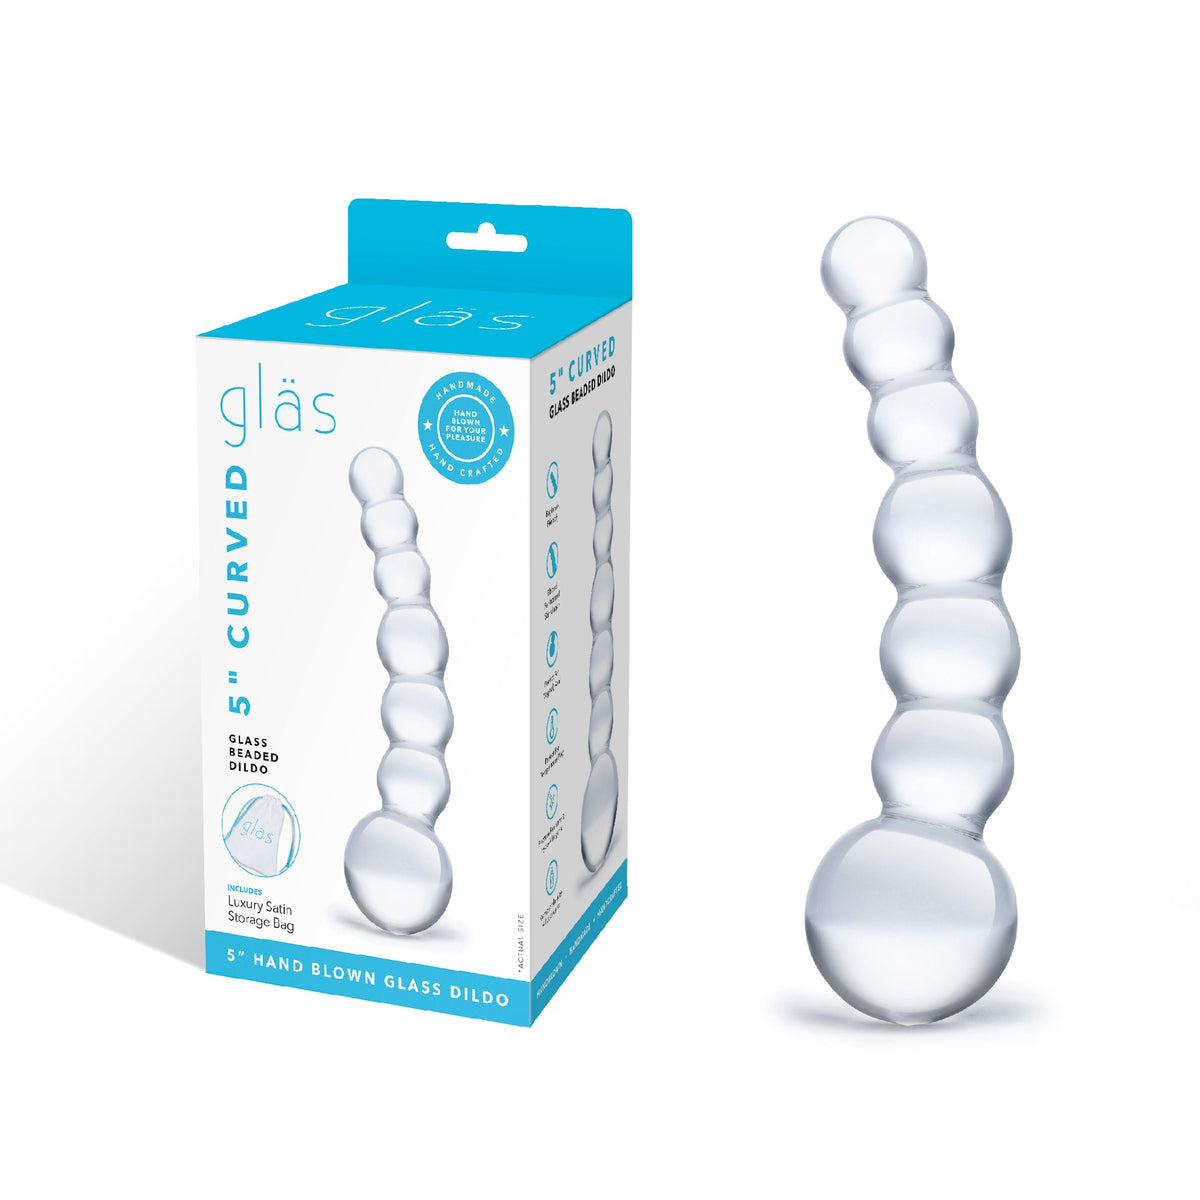 Glas - Curved Glass Beaded Hand Blown Glass Dildo 5&quot; (Clear)